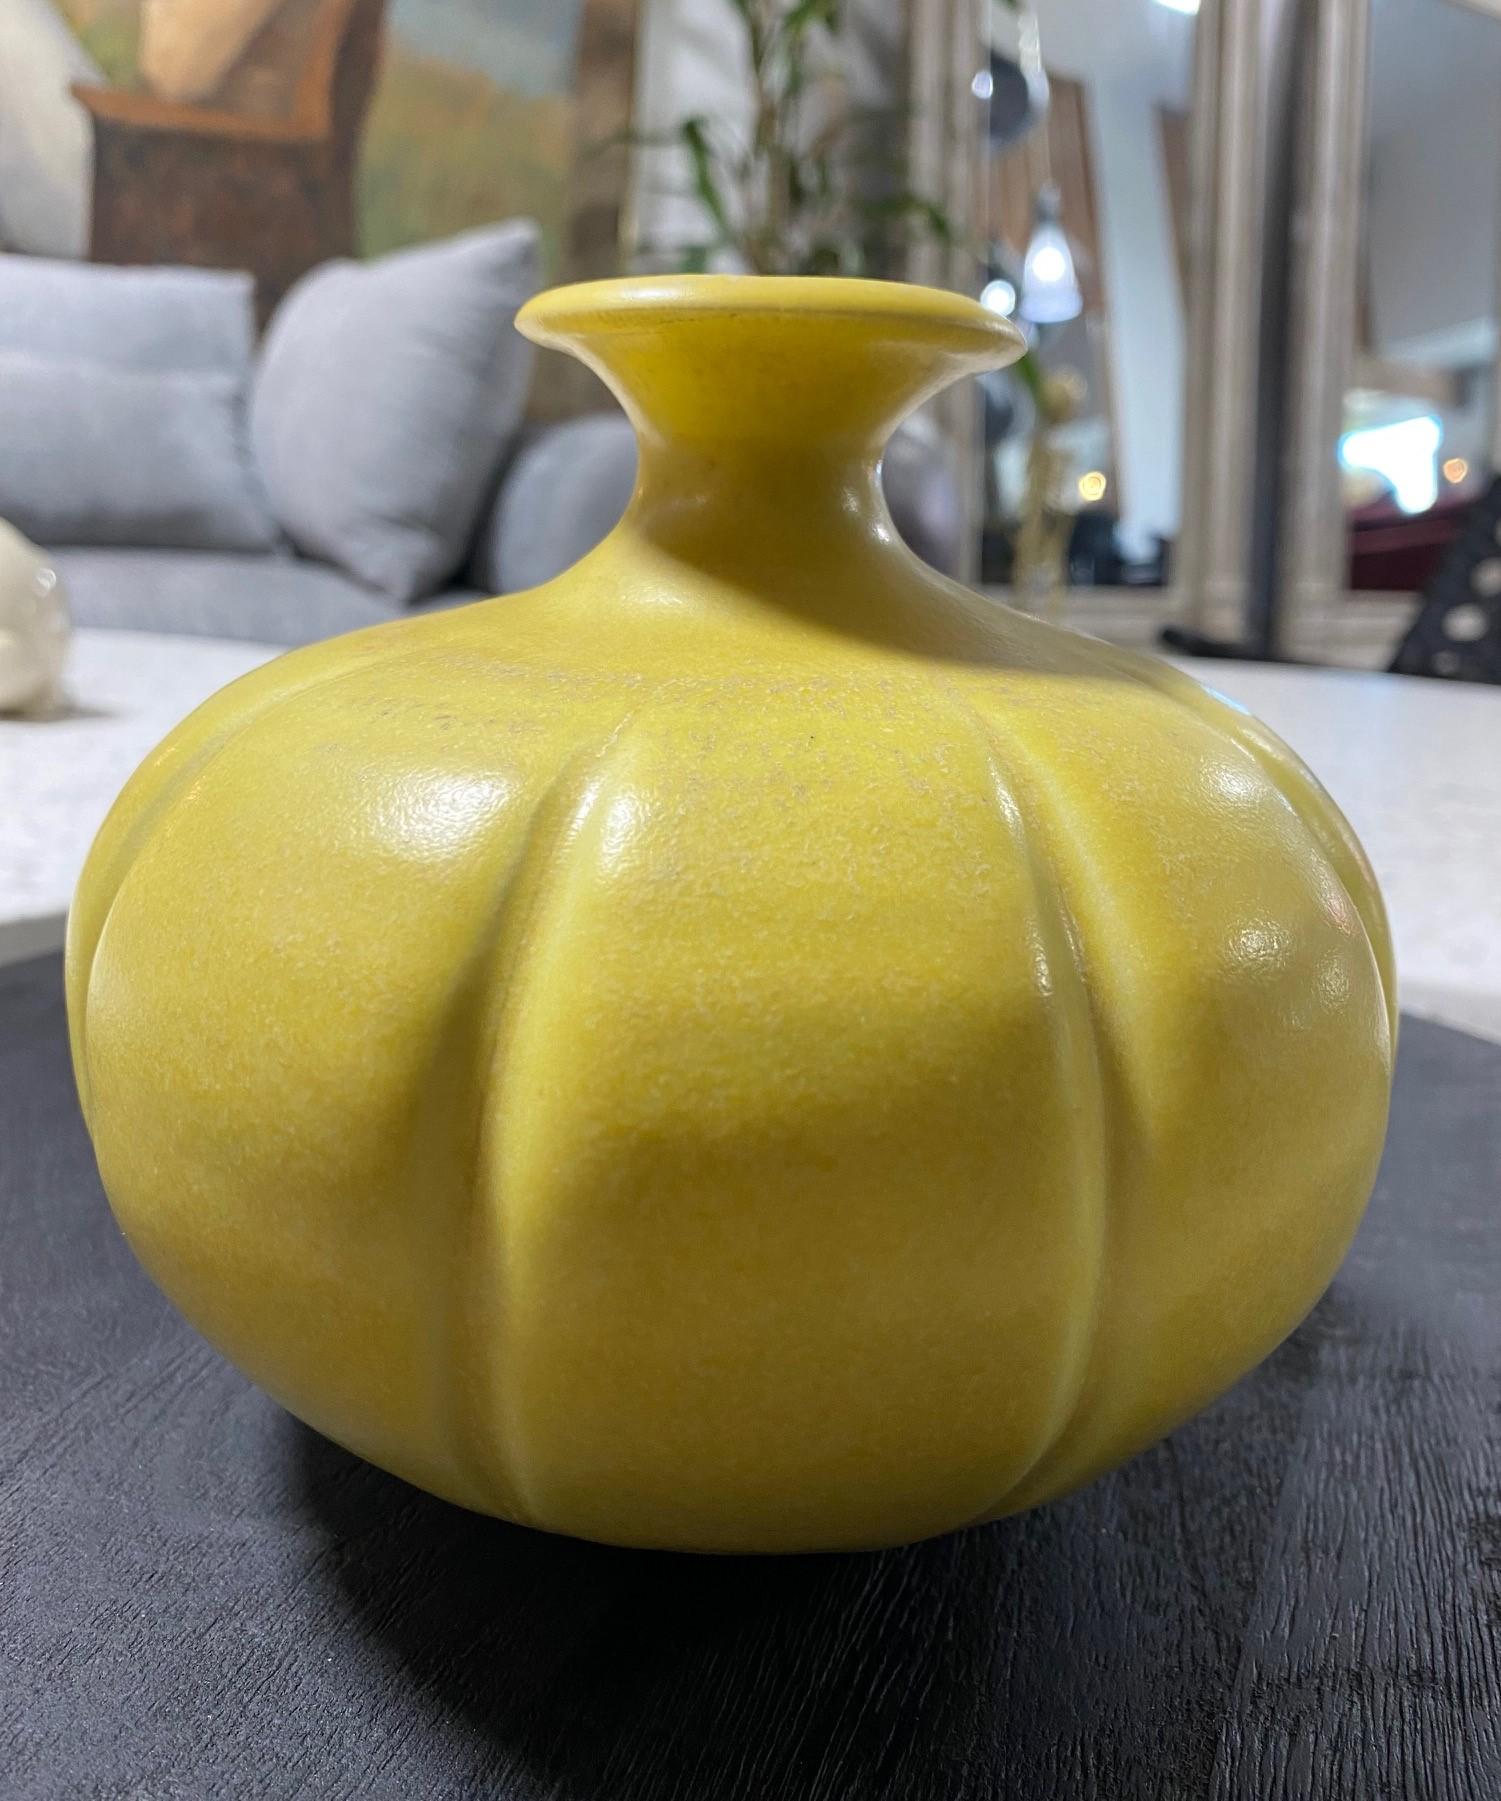 A wonderfully crafted and beautifully glazed vase by renowned American California master potter Laura Andreson. Gorgeous in its Mid-Century Modern design and color - a scarce and beautiful yellow glaze. 

Signed on the base by Andreson.

A quite